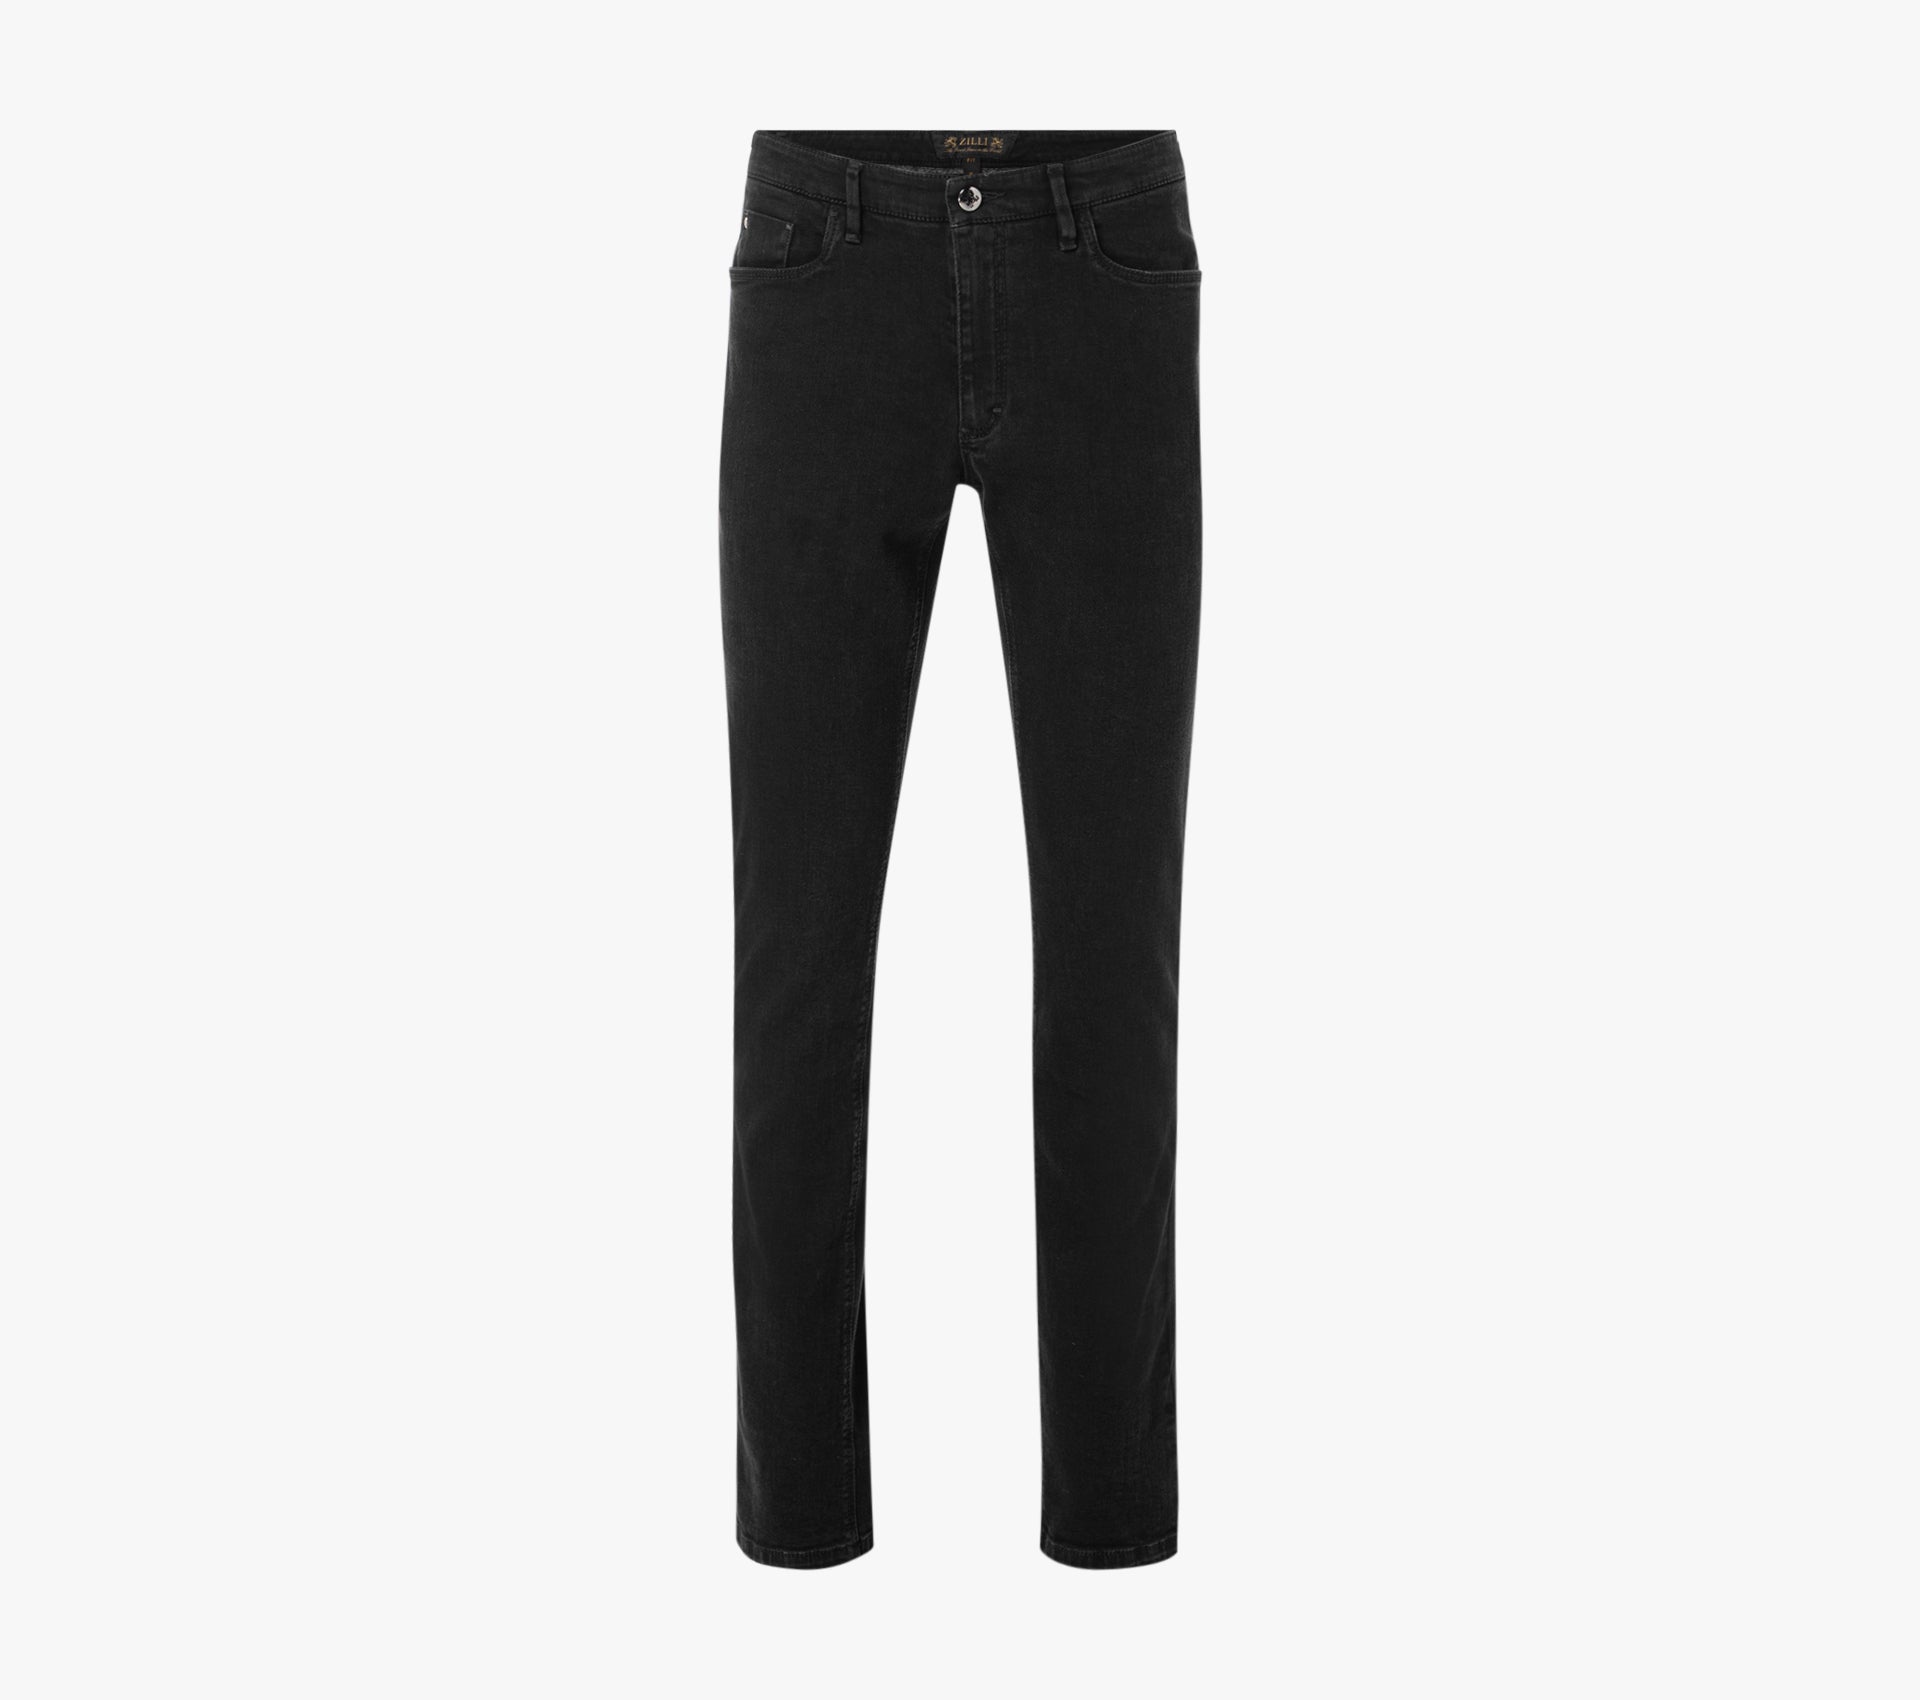 Slim Fit Jeans in Cotton